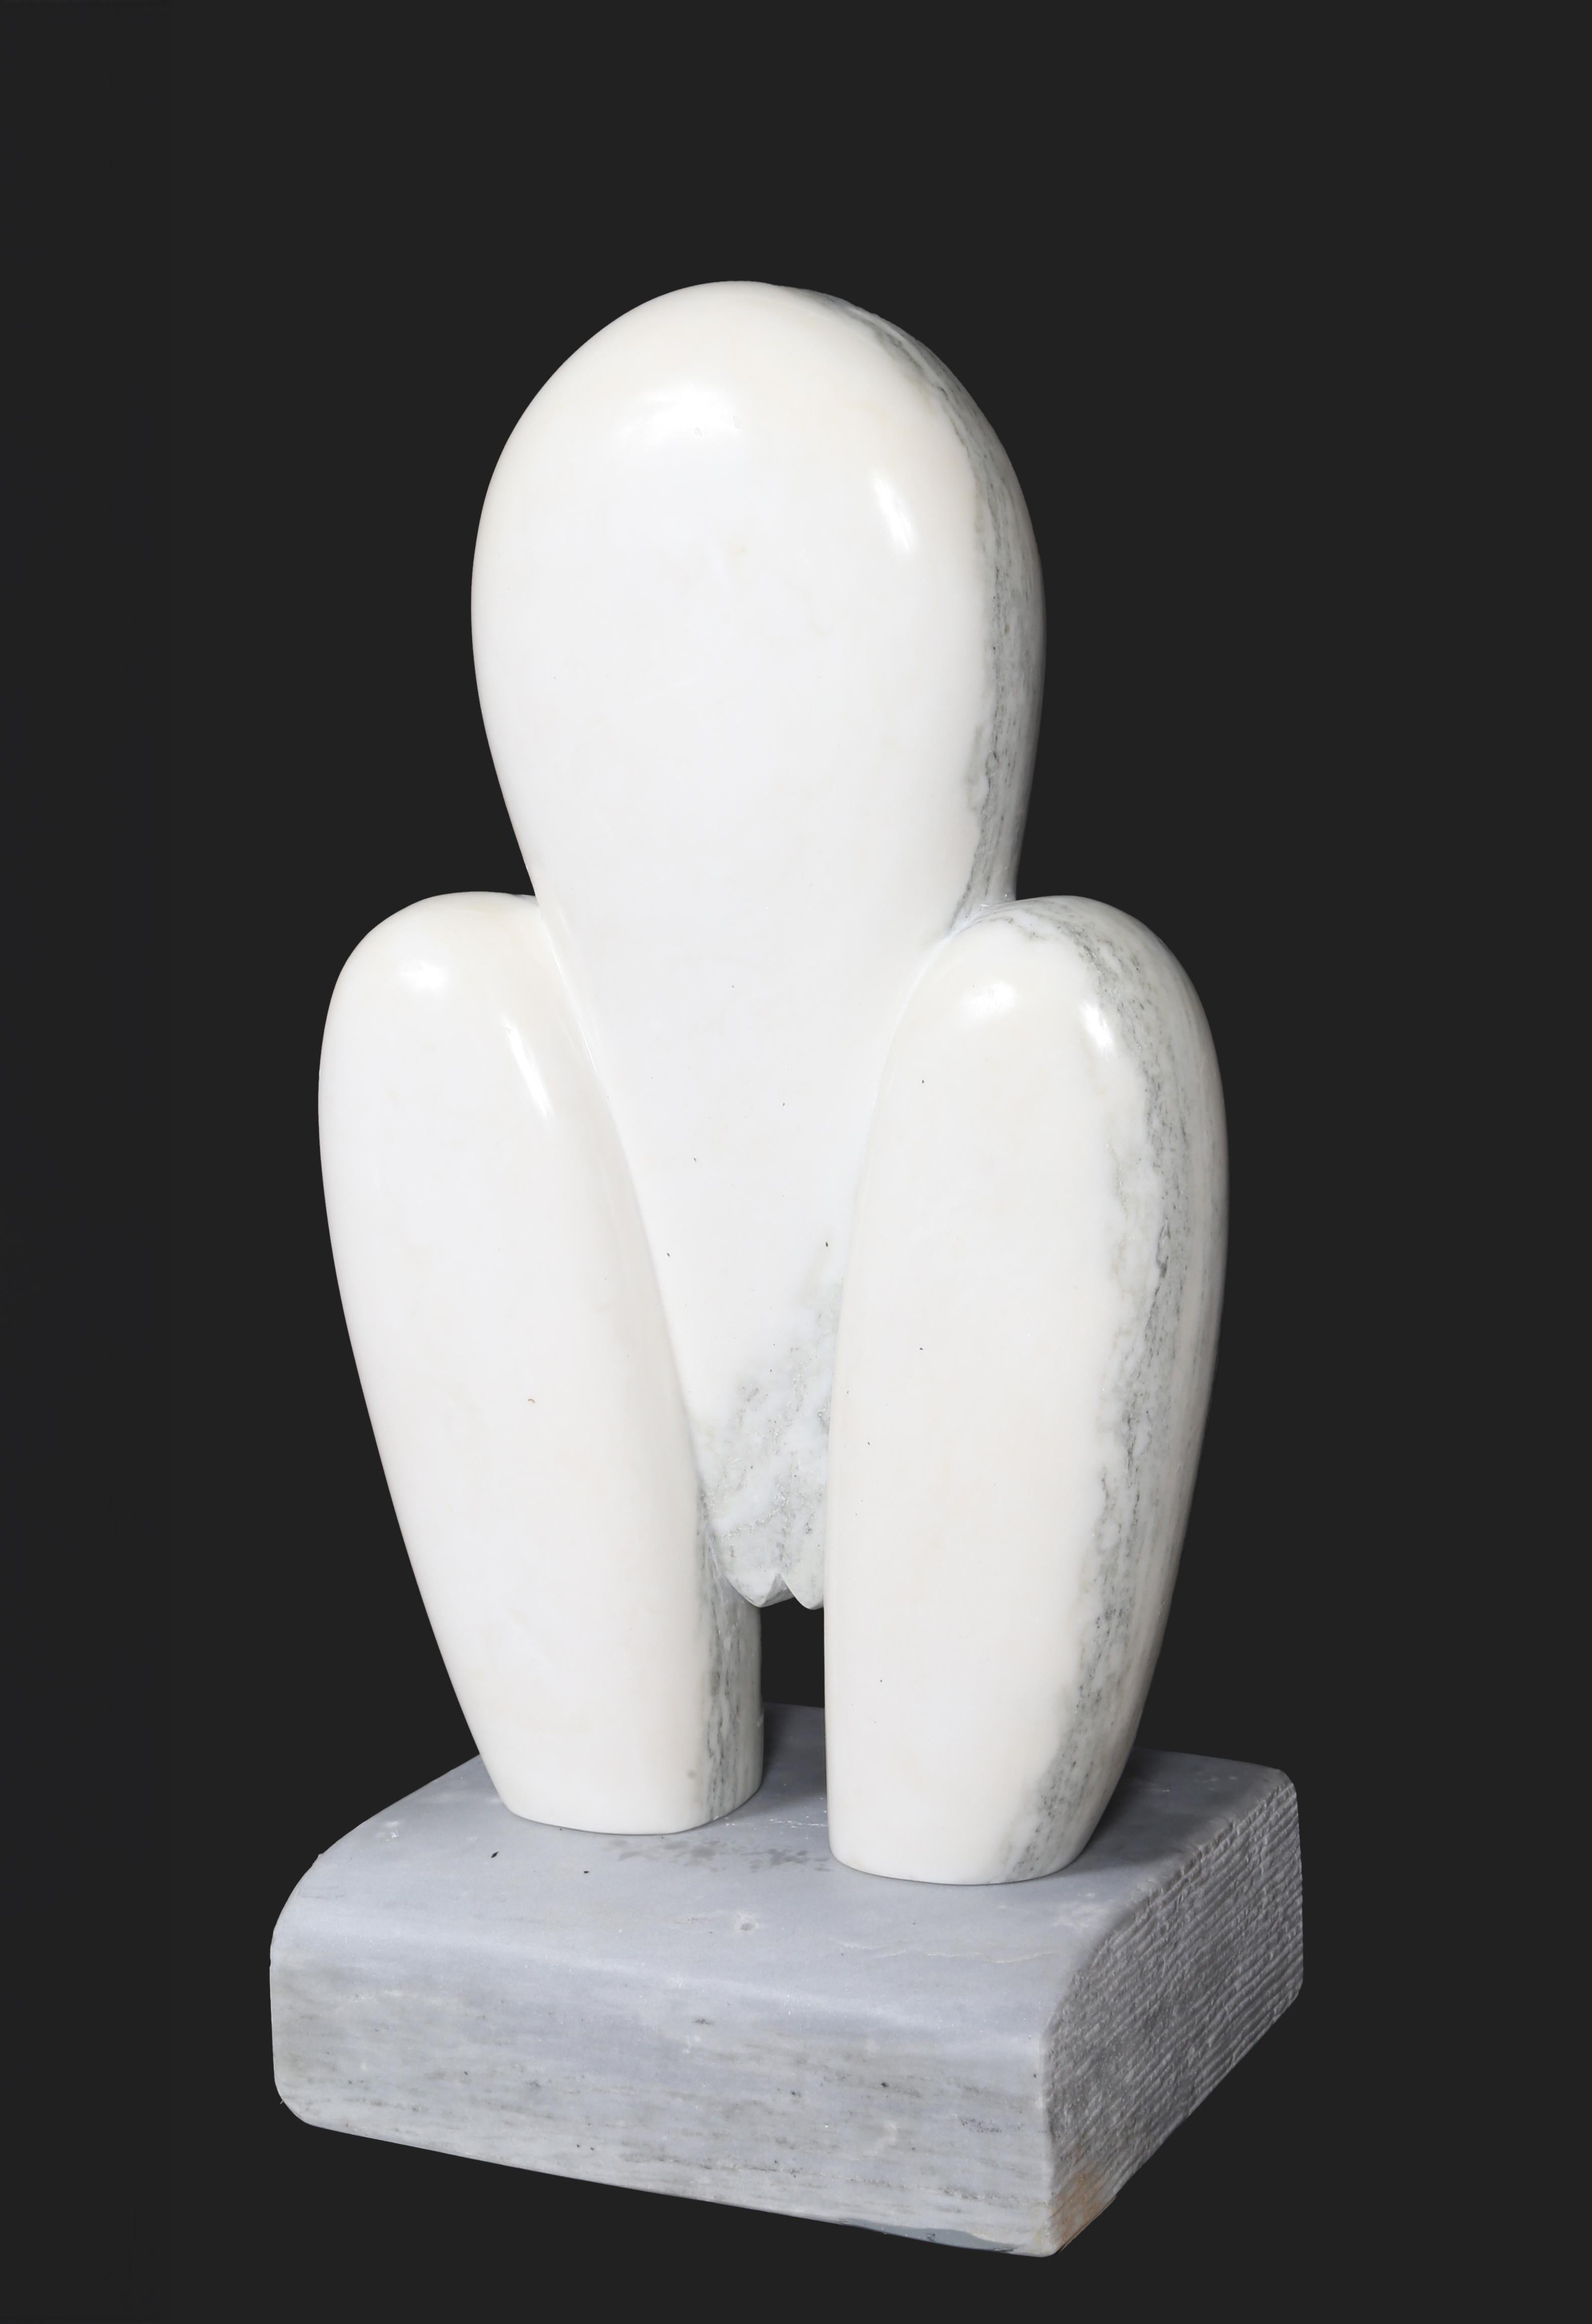 An original carved marble sculpture by Constantin Antonovici from his Torso Series. Referenced in 